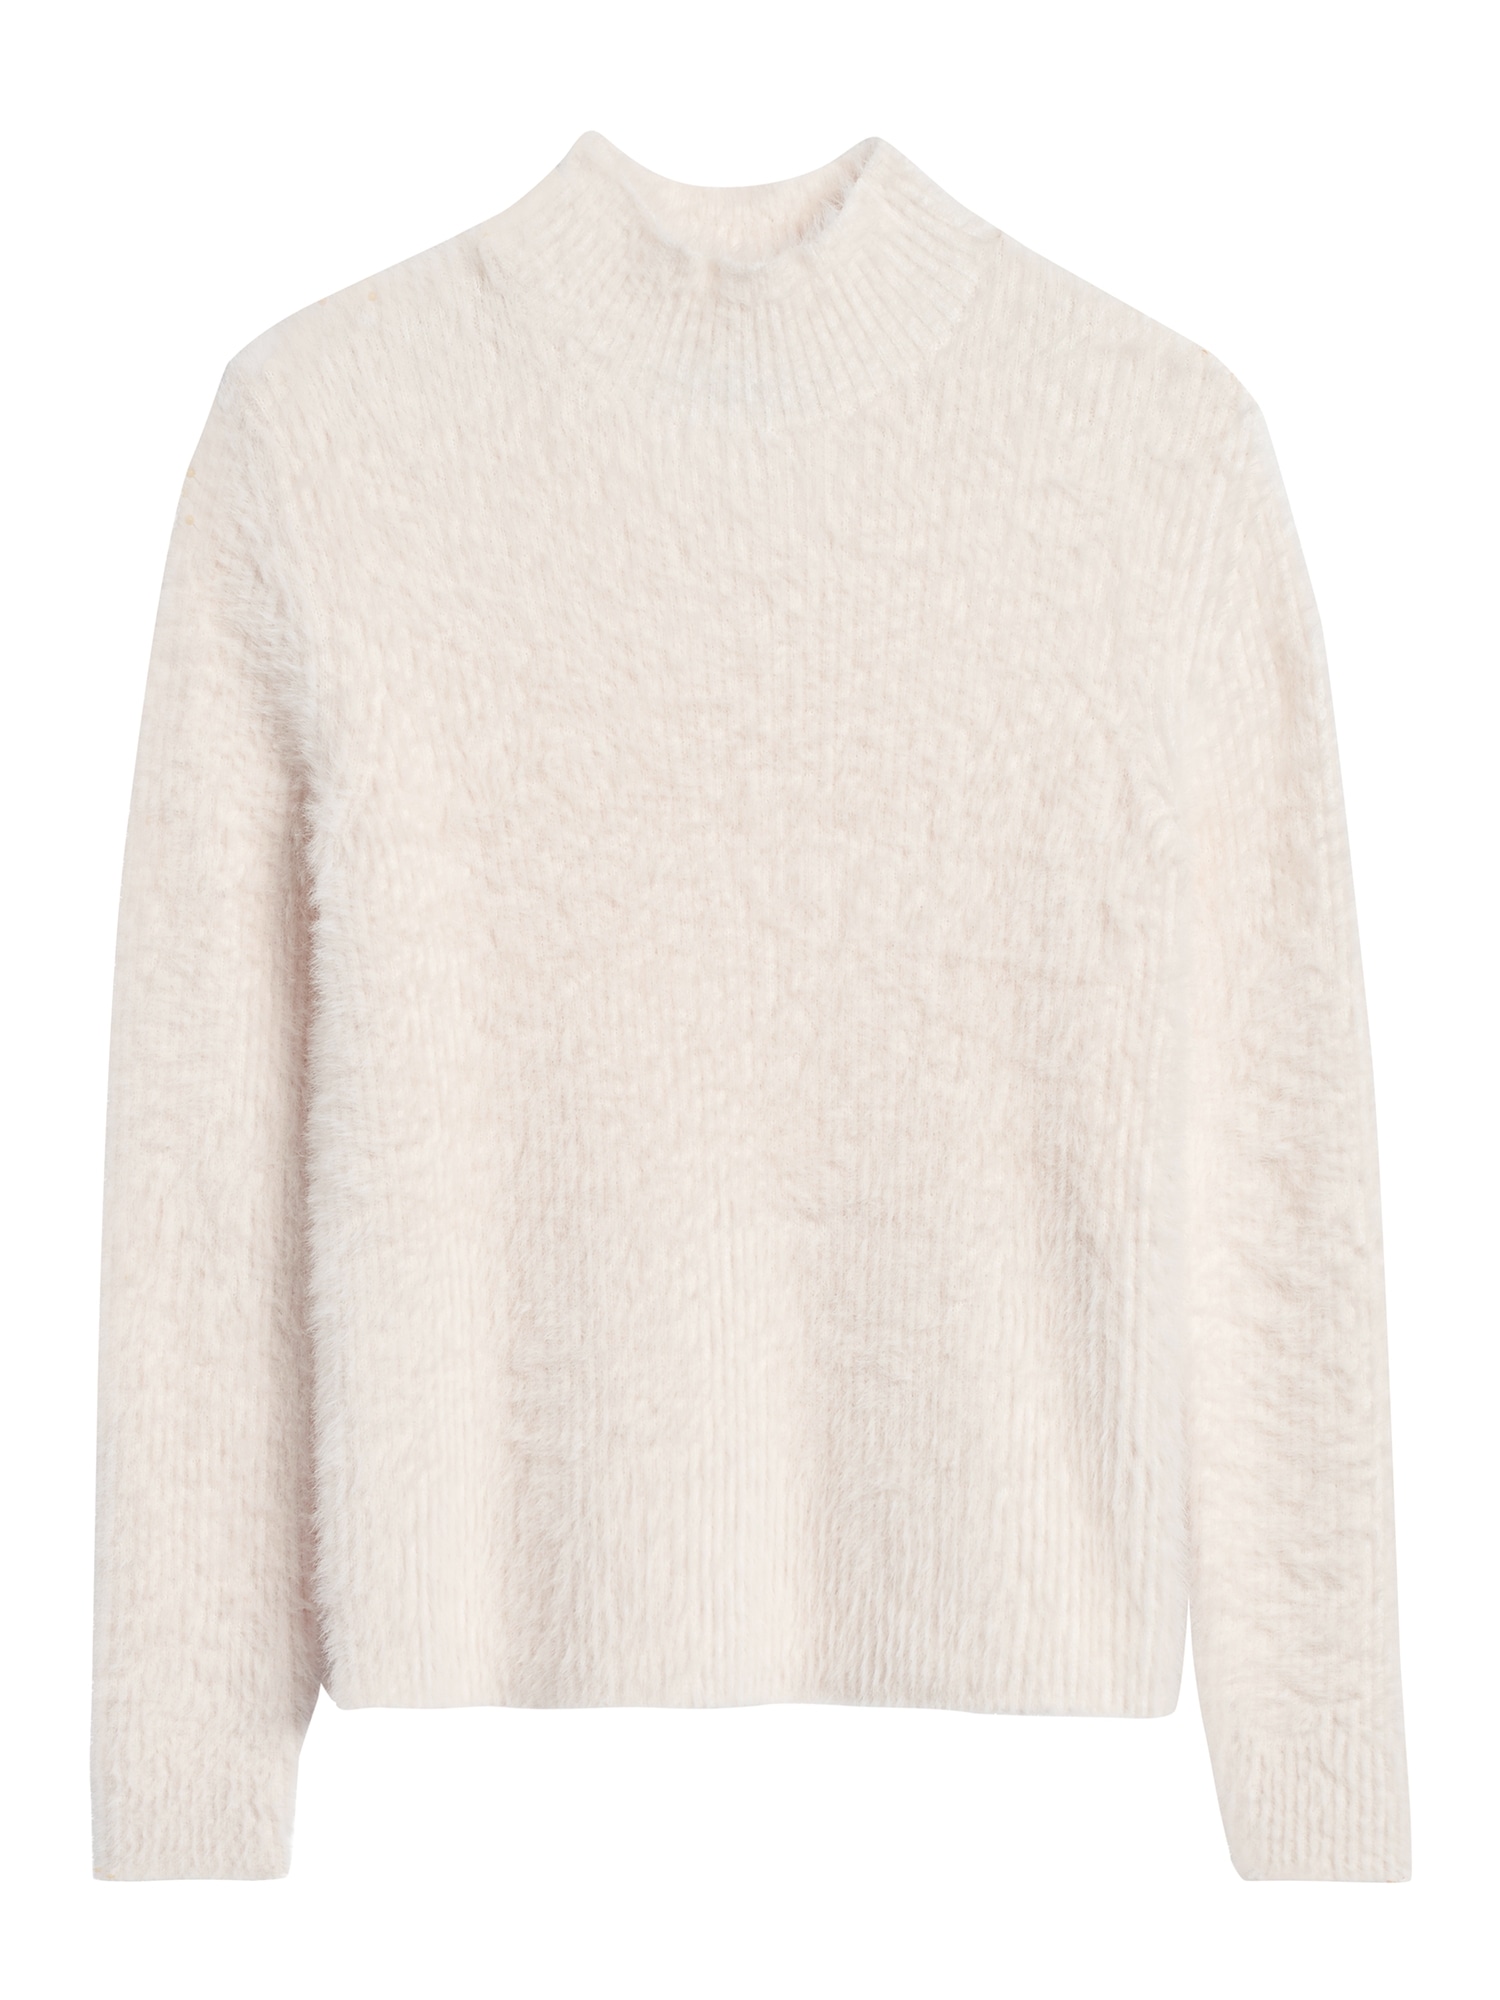 Cropped Fuzzy Sweater